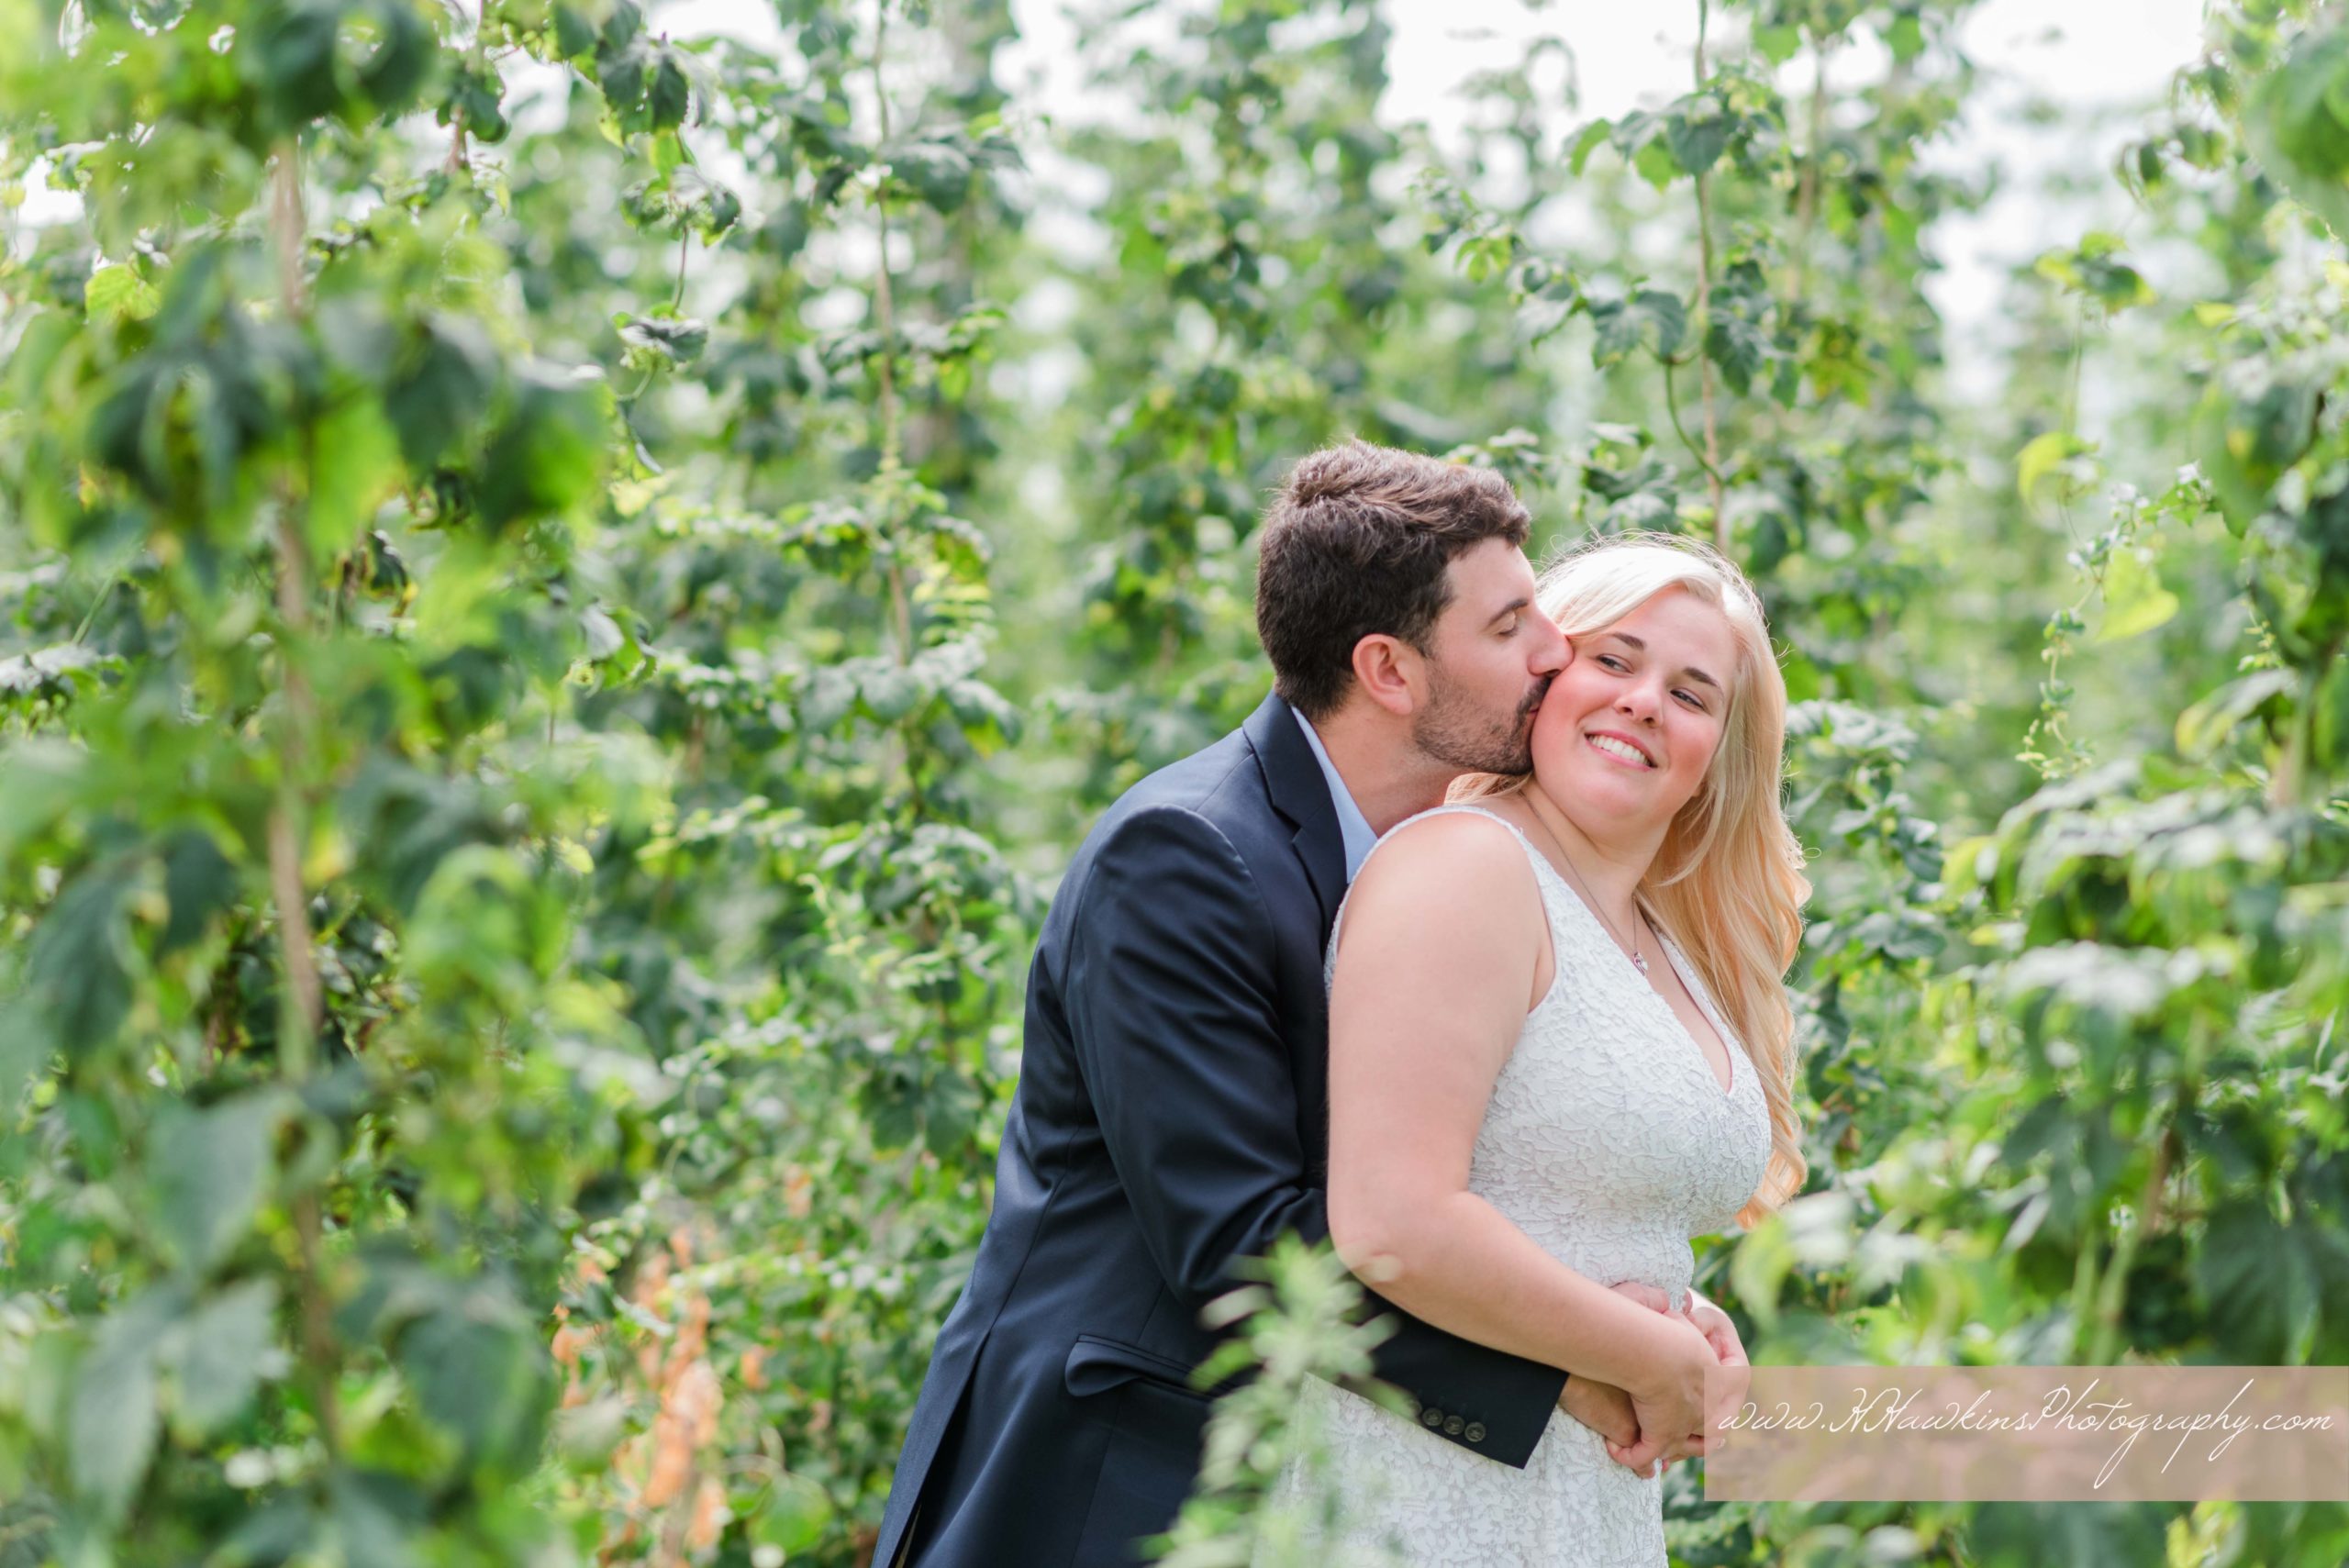 Portraits of bride and groom together at the Climbing Bines Hop Farm and Brewery for their wedding celebration among the bines